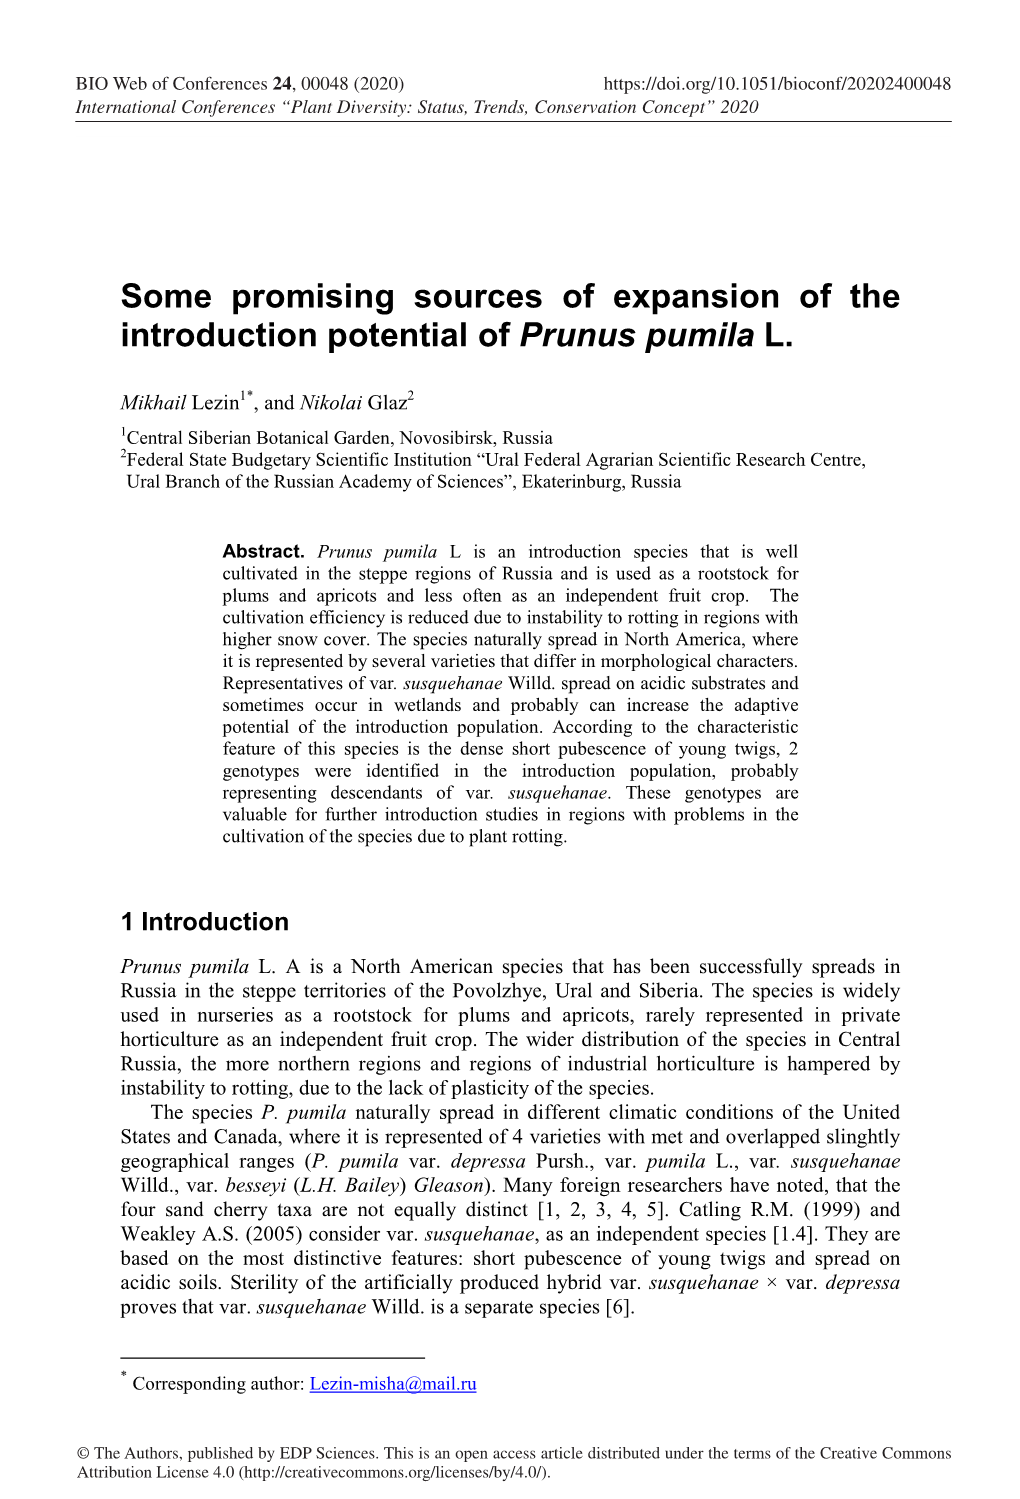 Some Promising Sources of Expansion of the Introduction Potential of Prunus Pumila L